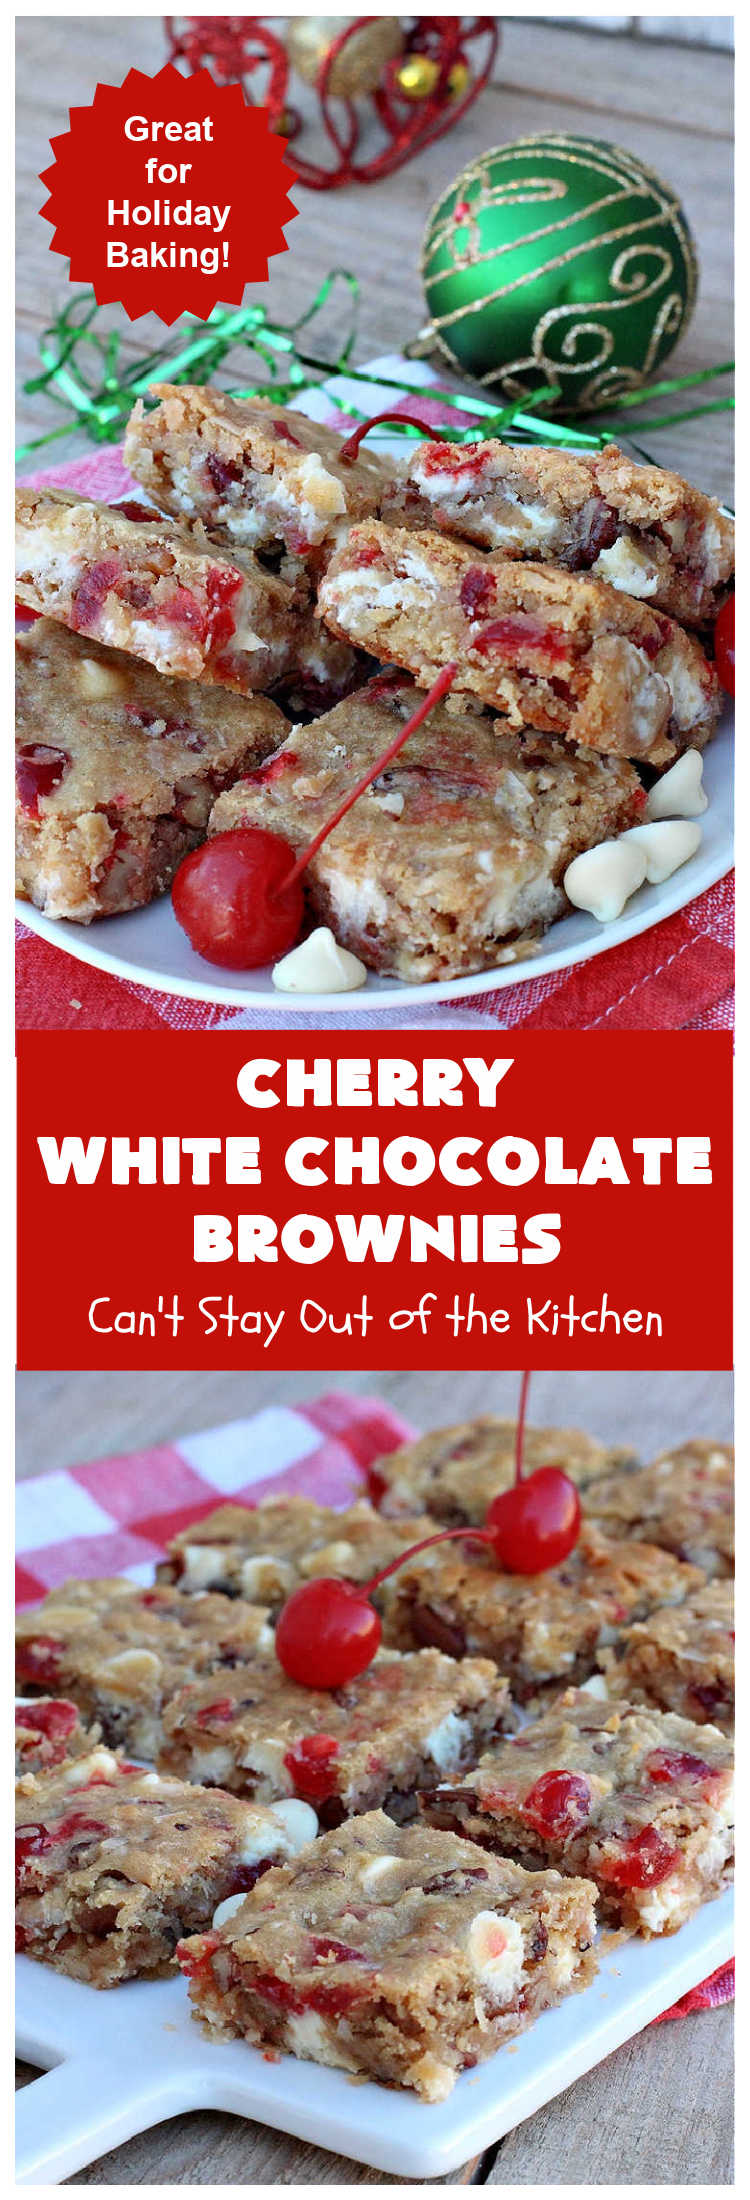 Cherry White Chocolate Brownies | Can't Stay Out of the Kitchen